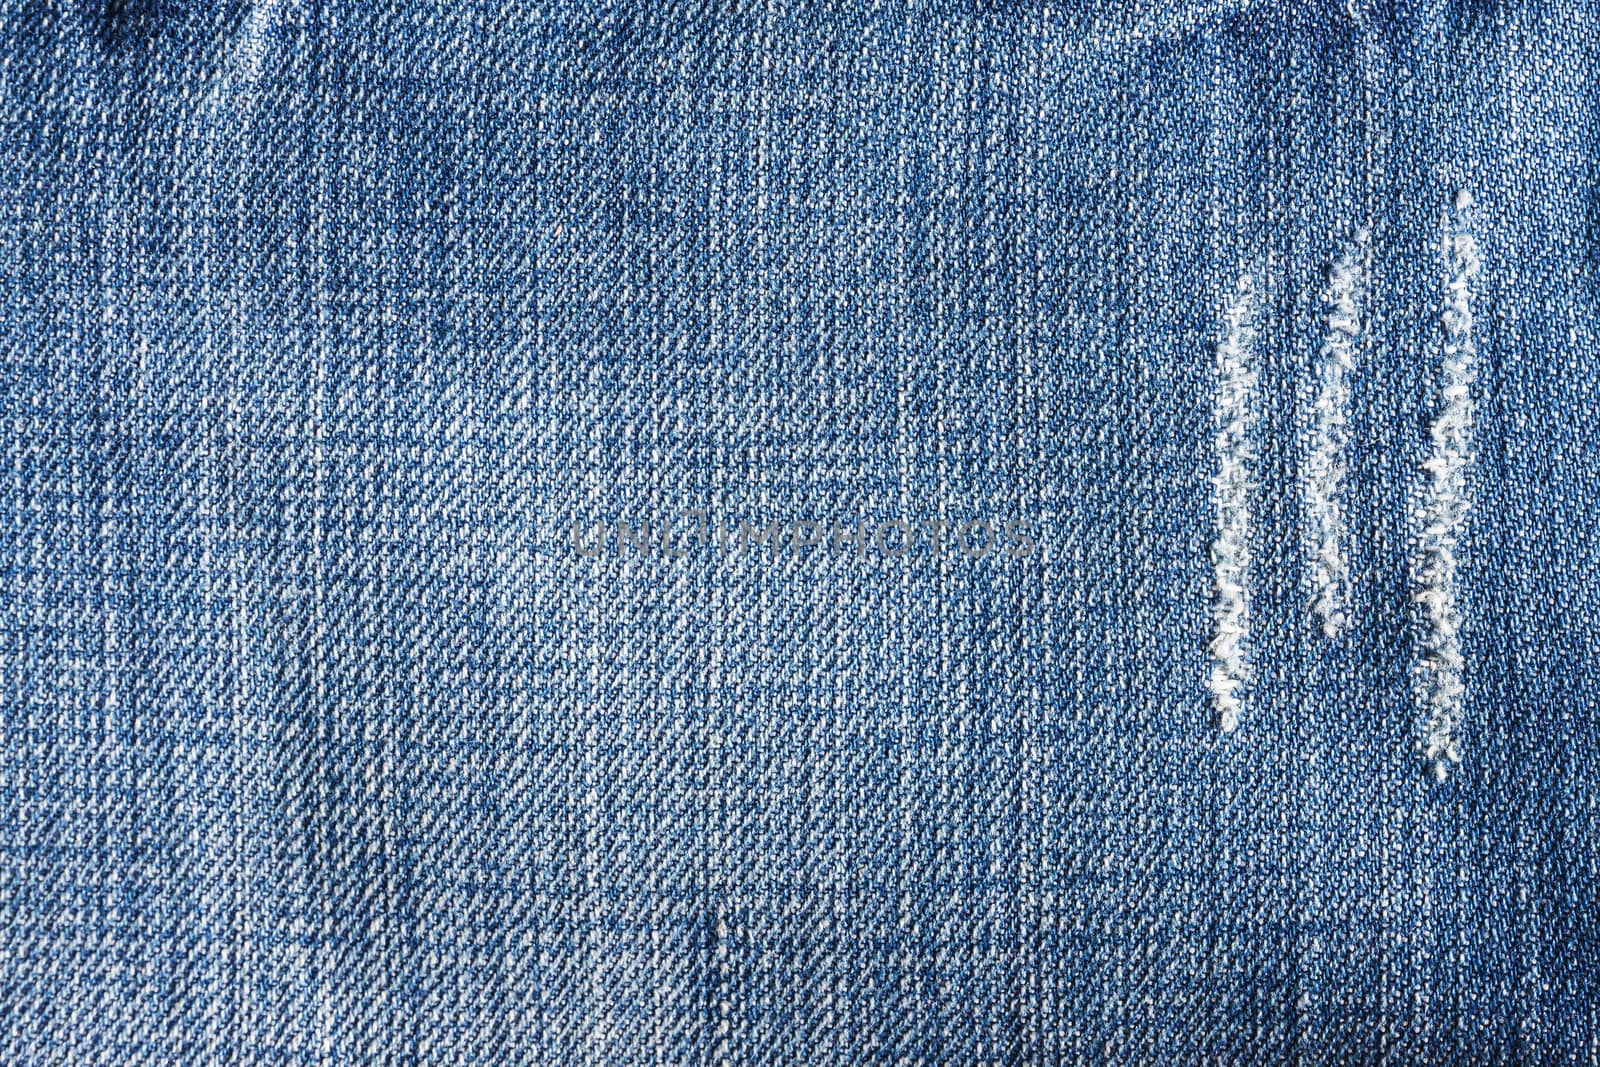 Jeans close-up, texture, torn, mopped pieces